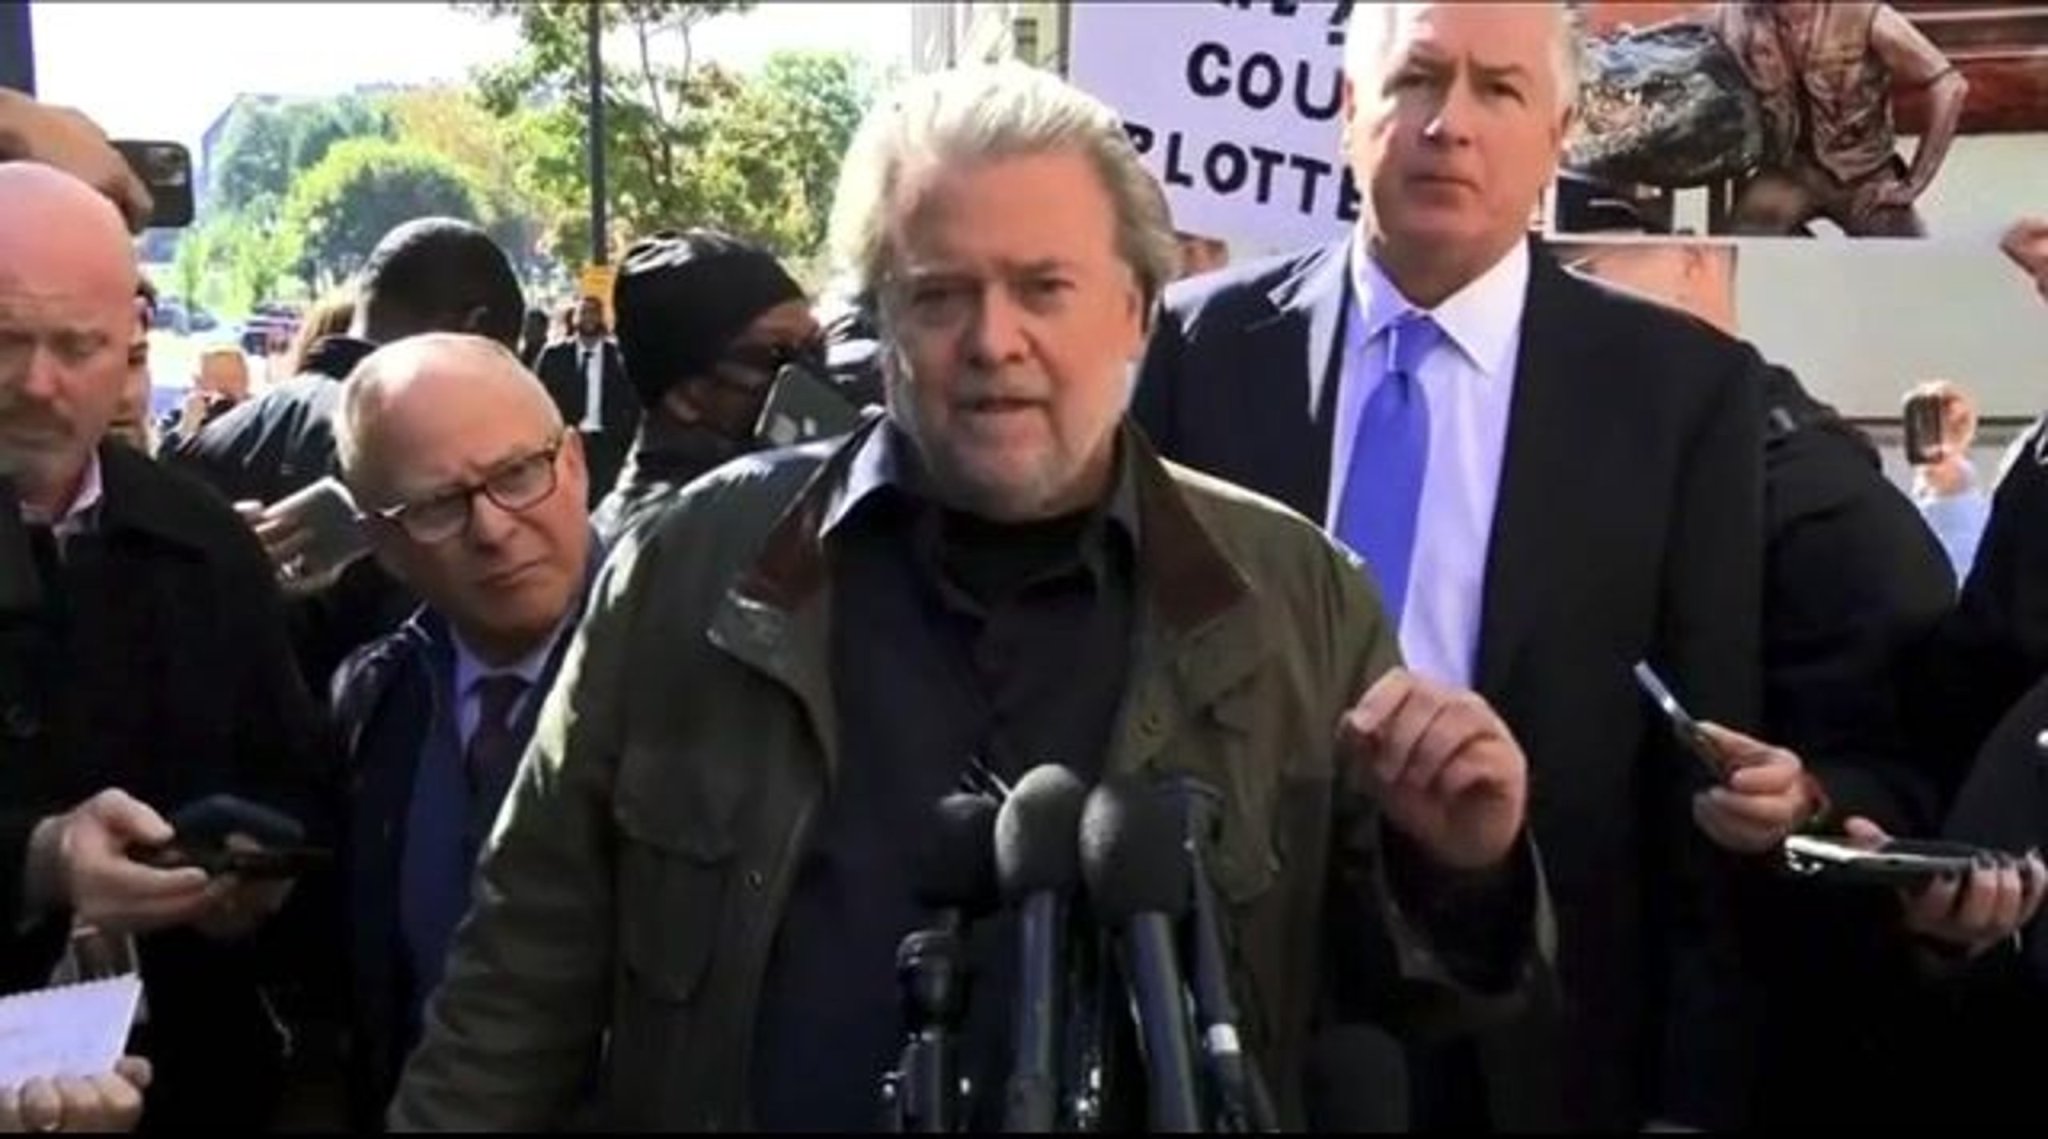 Steve Bannon spoke after receiving 4 months in prison and a fine for contempt of Congress for refusing 1/6 committee.